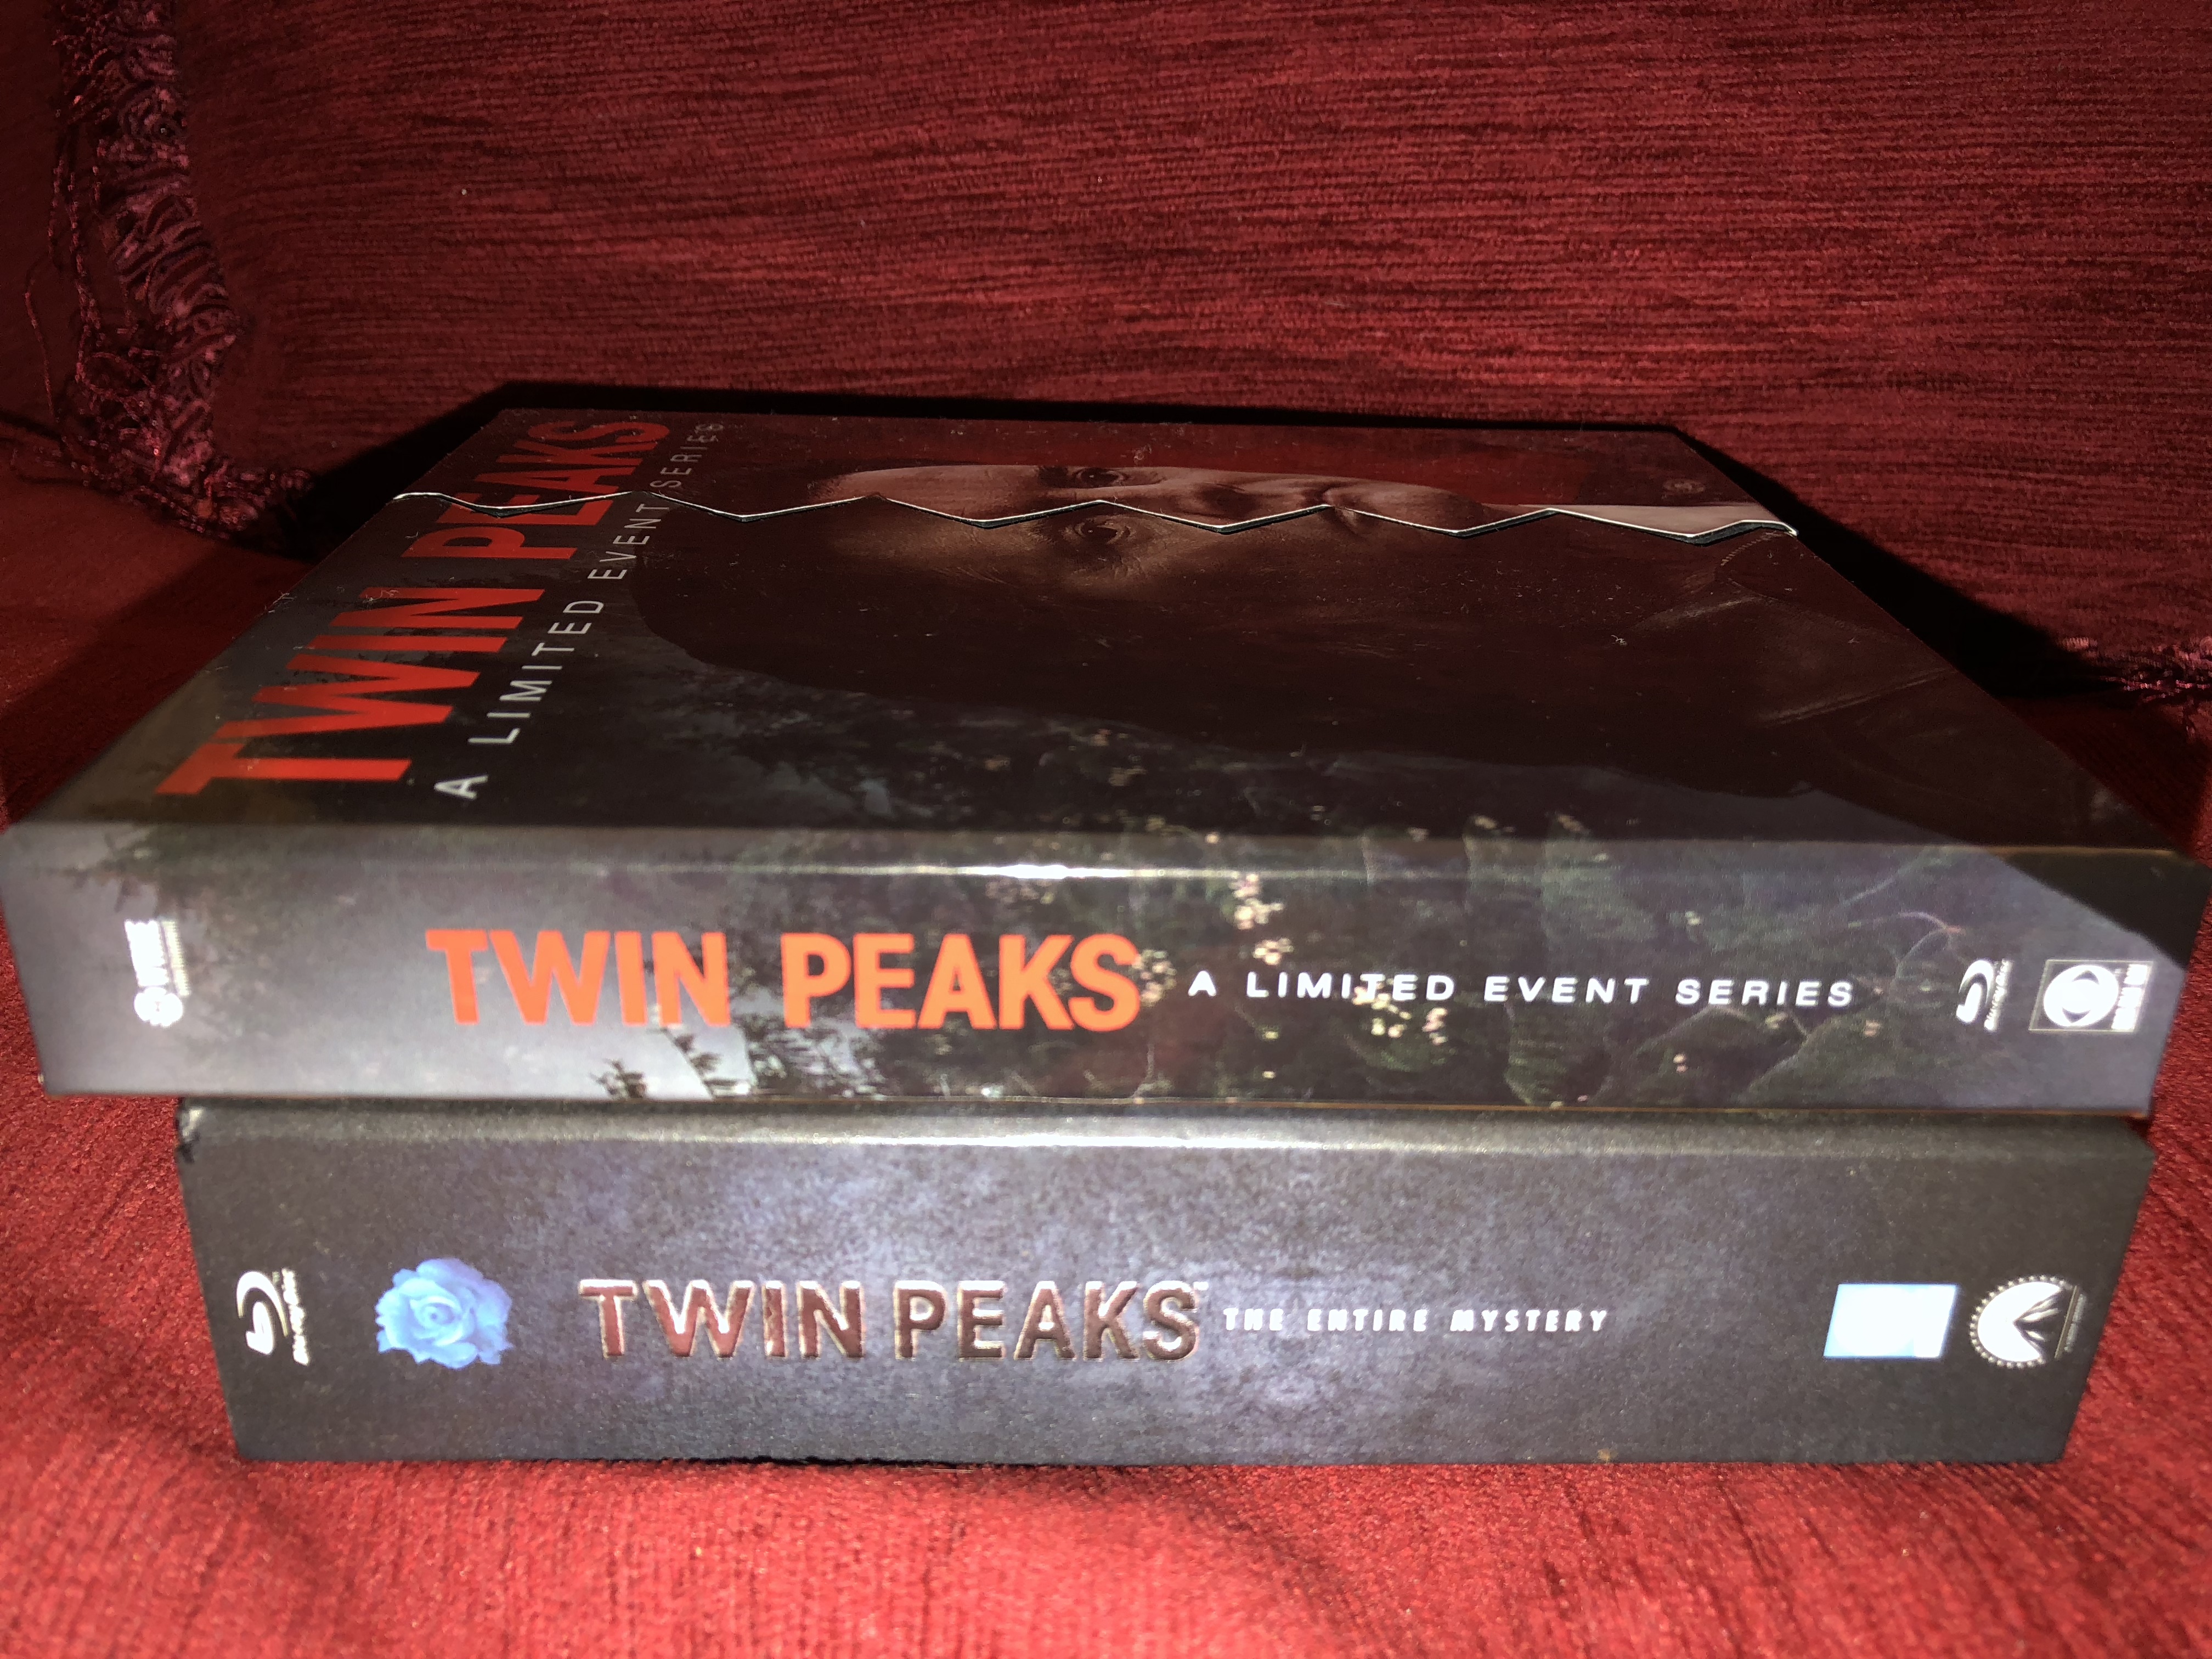 [Megathread] Twin Peaks: A Limited Event Series BD/DVD release ...